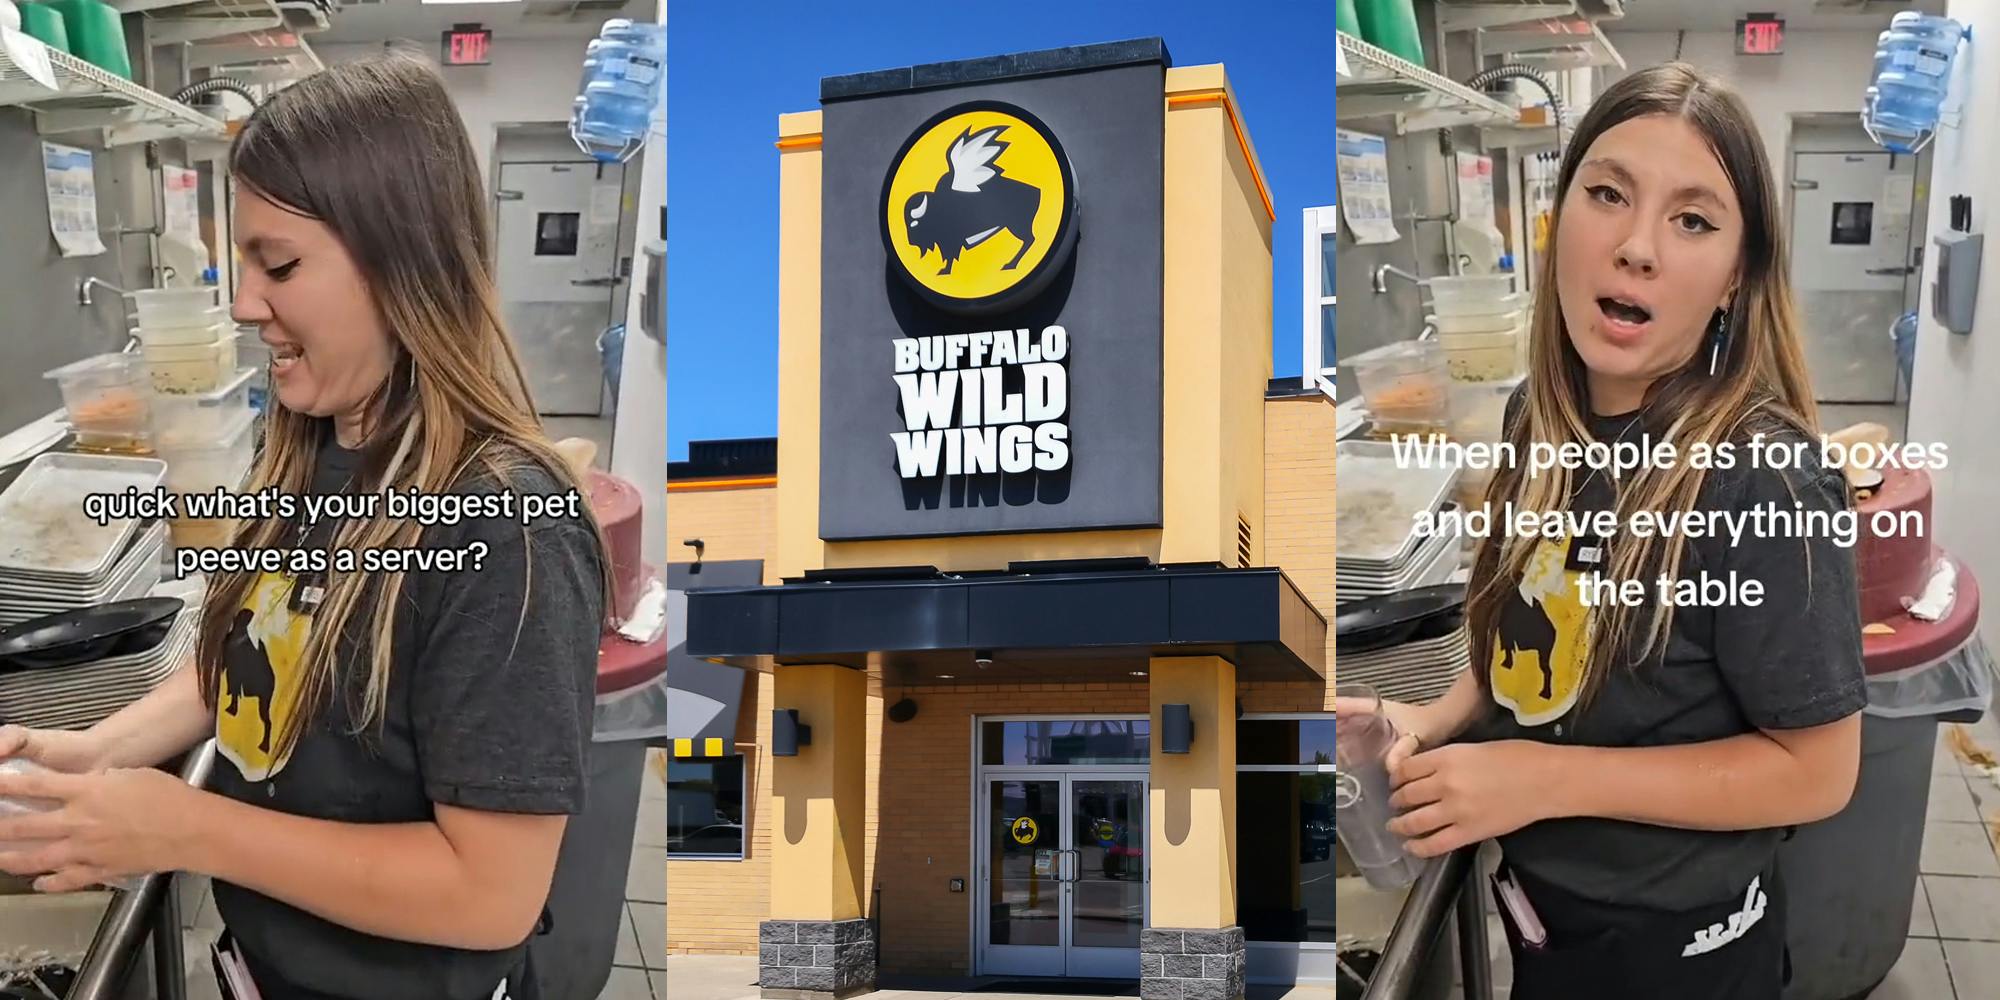 Buffalo Wild Wings server with caption "quick what's your biggest pet peeve as a server?" (l) Buffalo Wild Wings building with sign (c) Buffalo Wild Wings server speaking with caption "When people ask for boxes and leave everything on the table" (r)